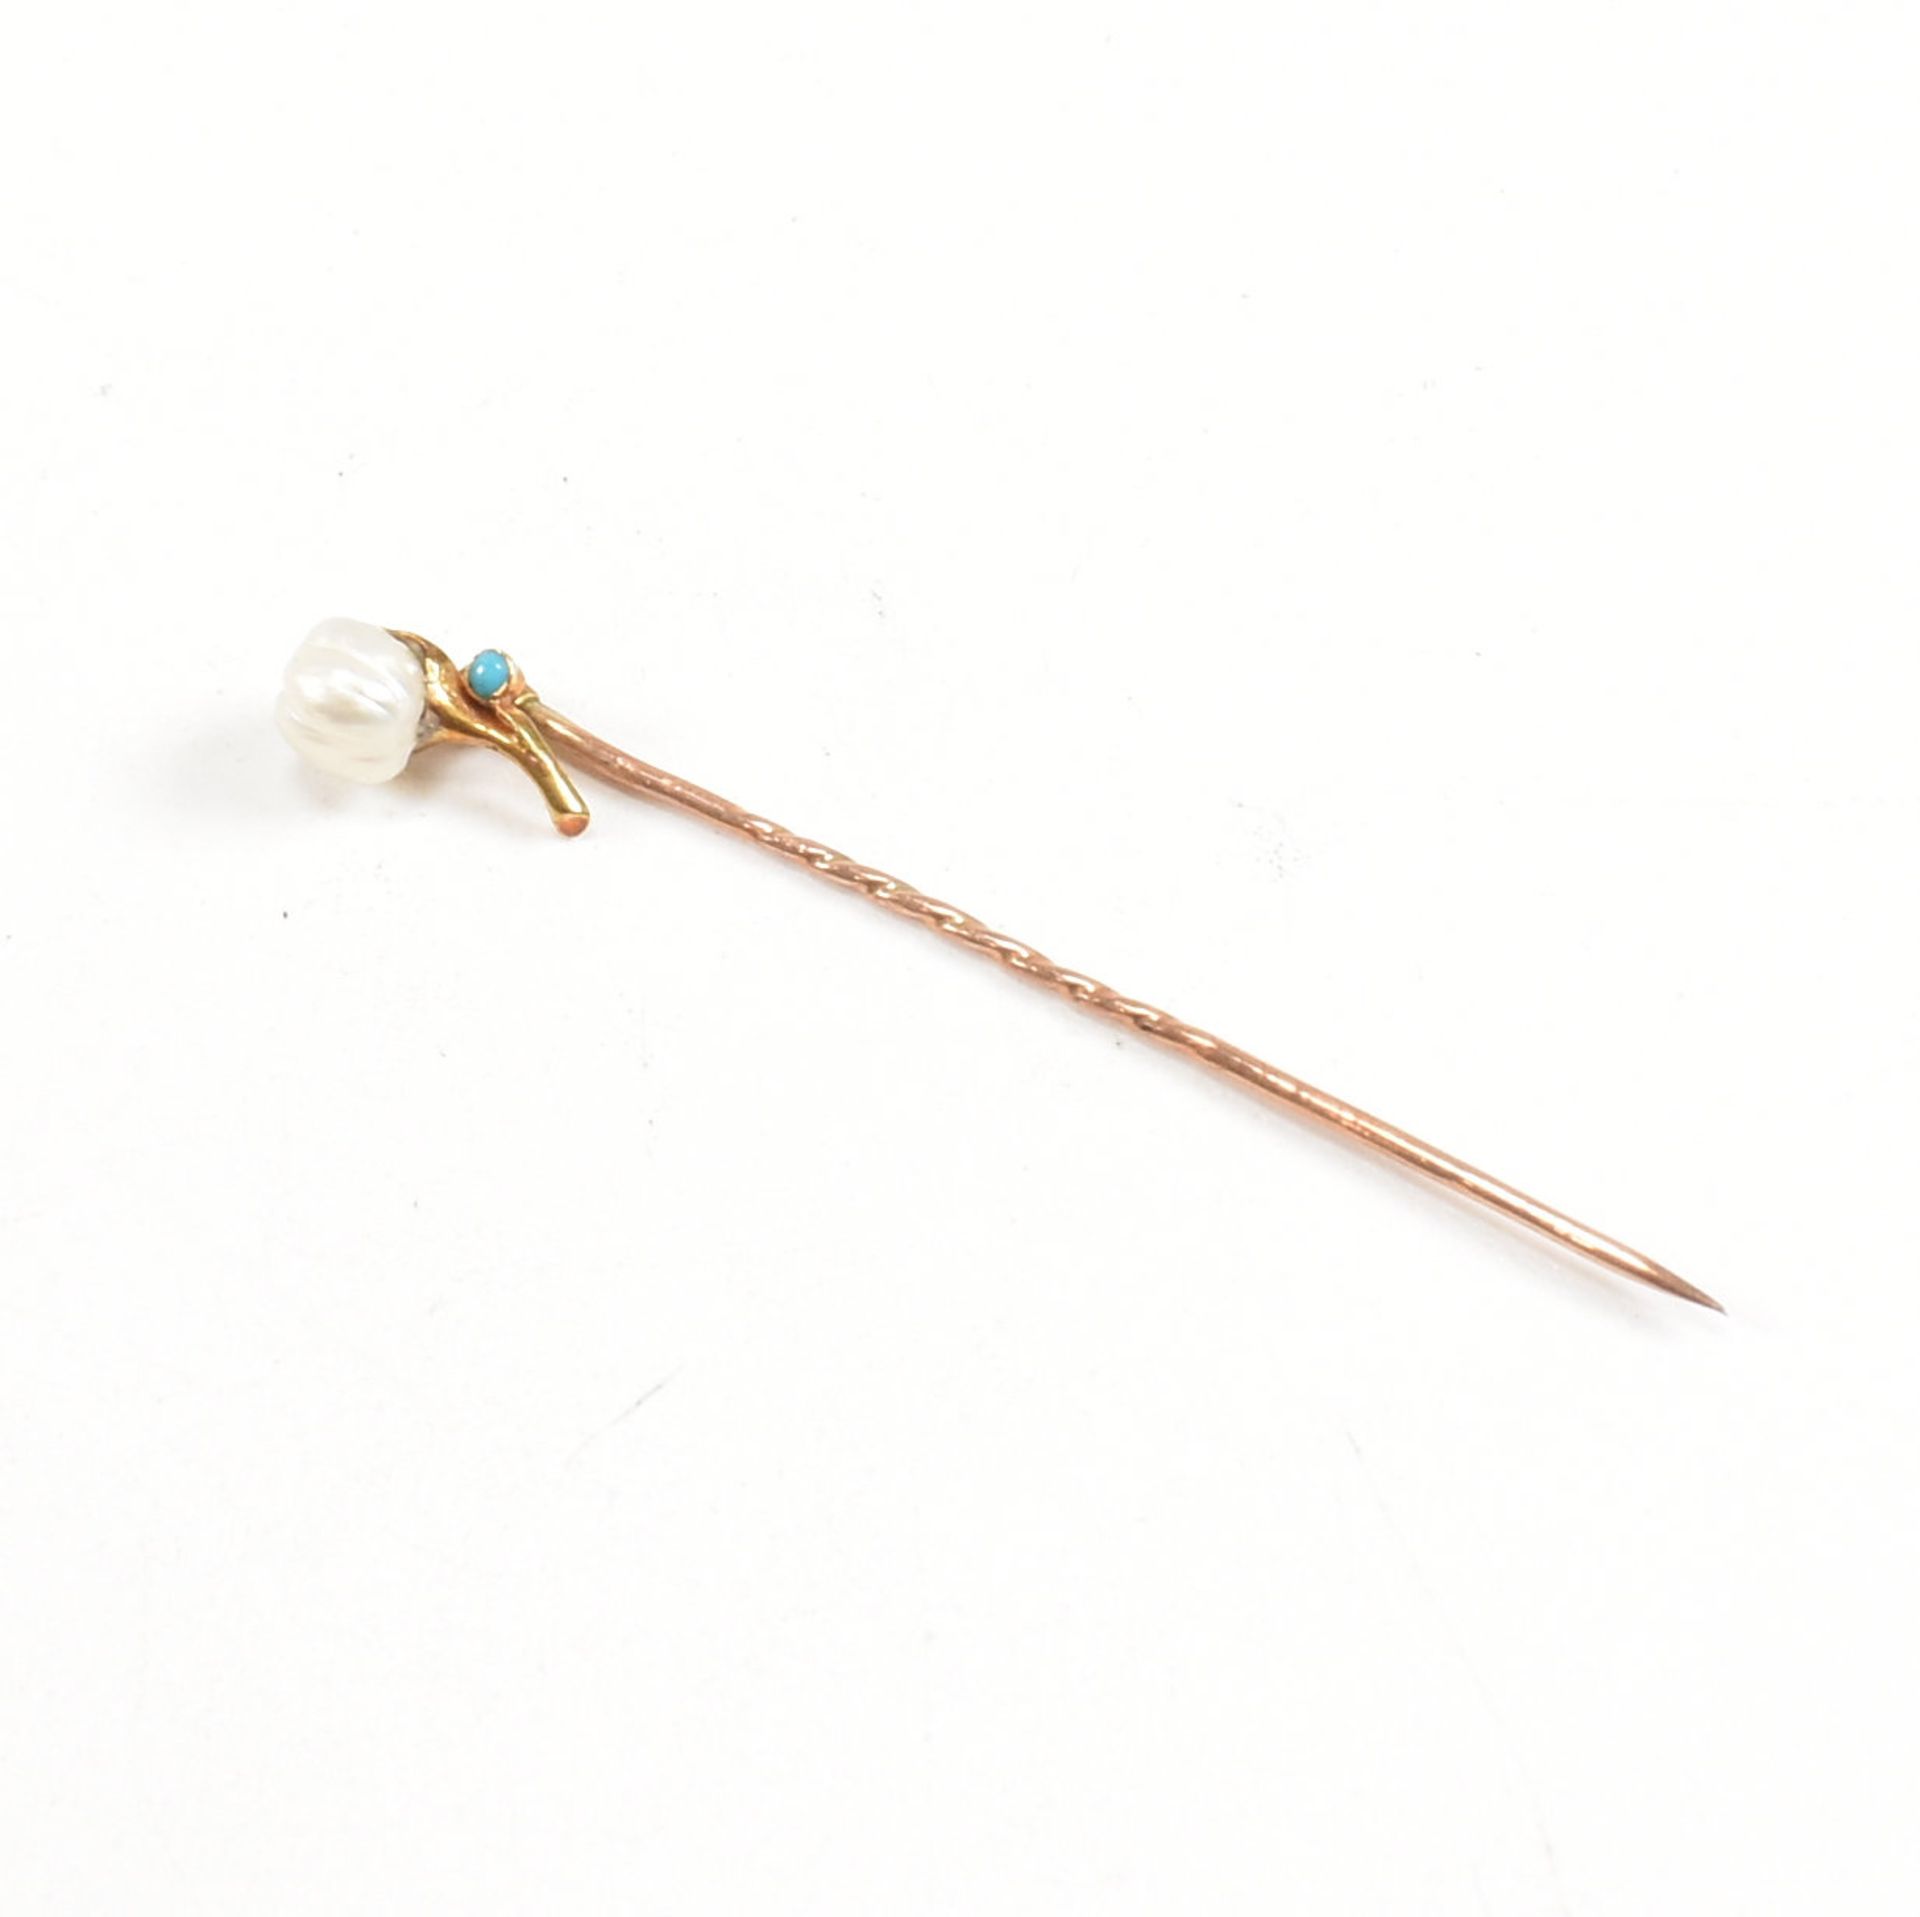 CASED 19TH CENTURY PEARL & TURQUOISE STICK PIN - Image 4 of 10